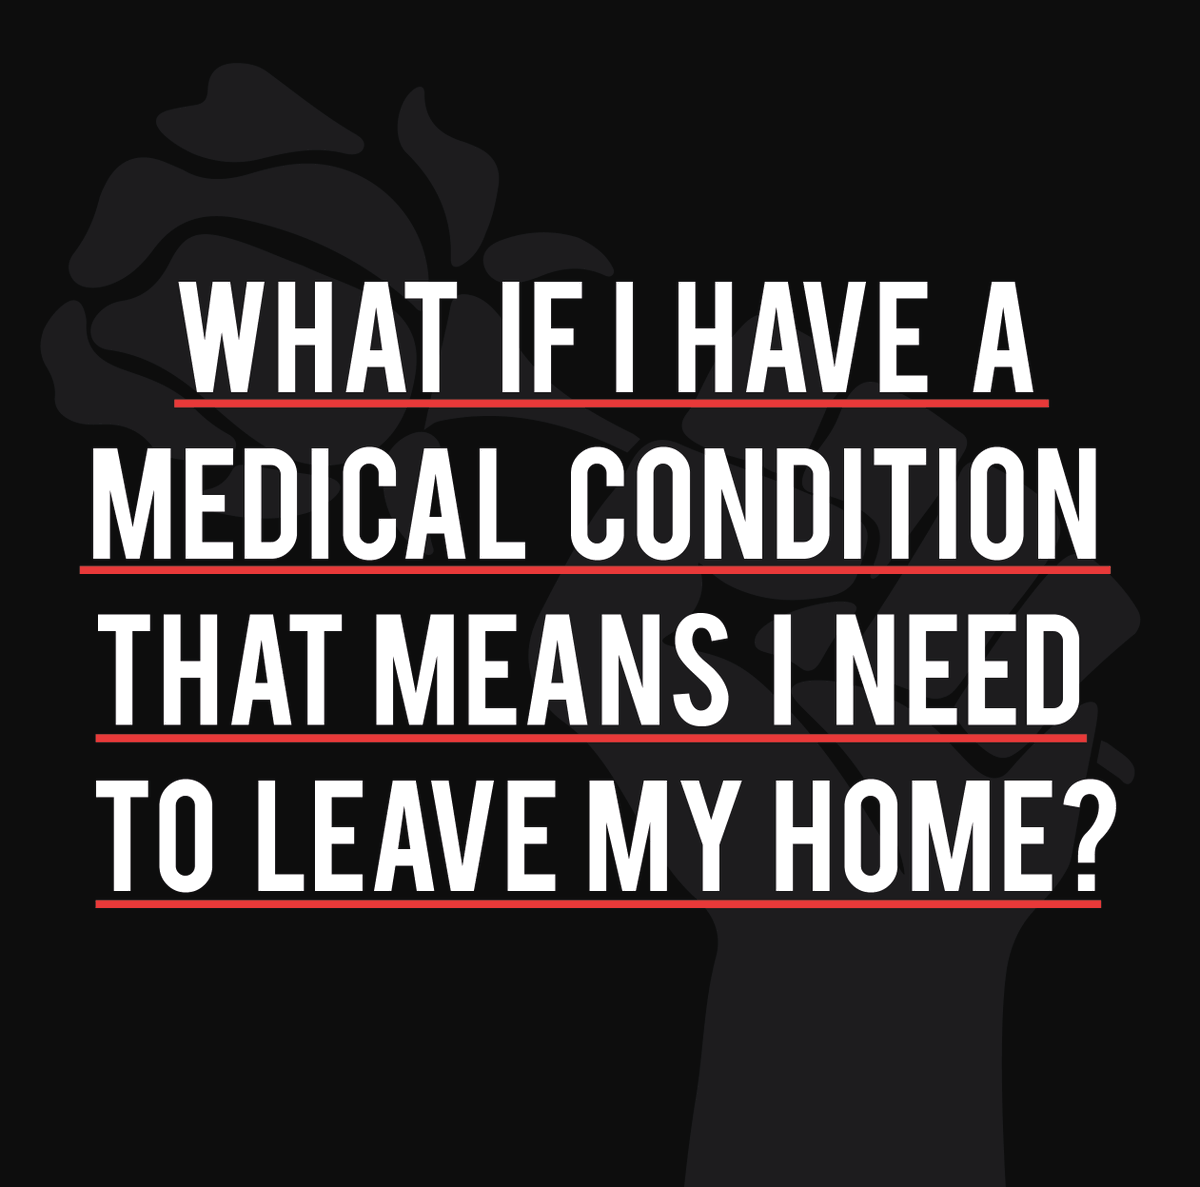 What if I have a medical condition that means I need to leave my home?You are allowed to leave the home for a ‘medical need’.